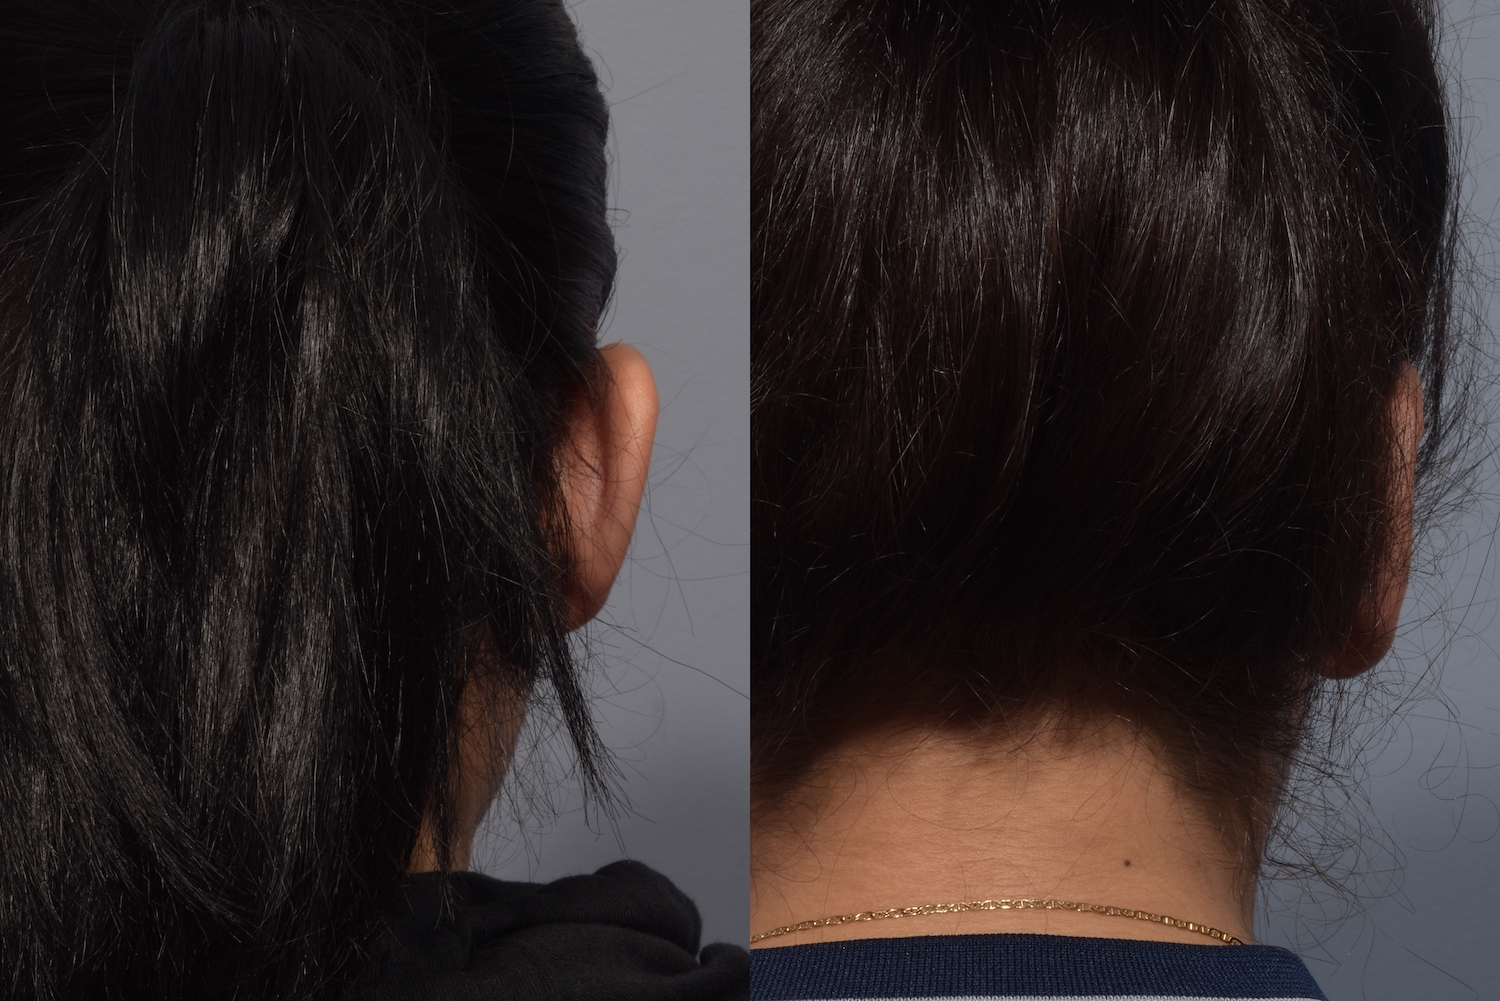 patient before and after otoplasty